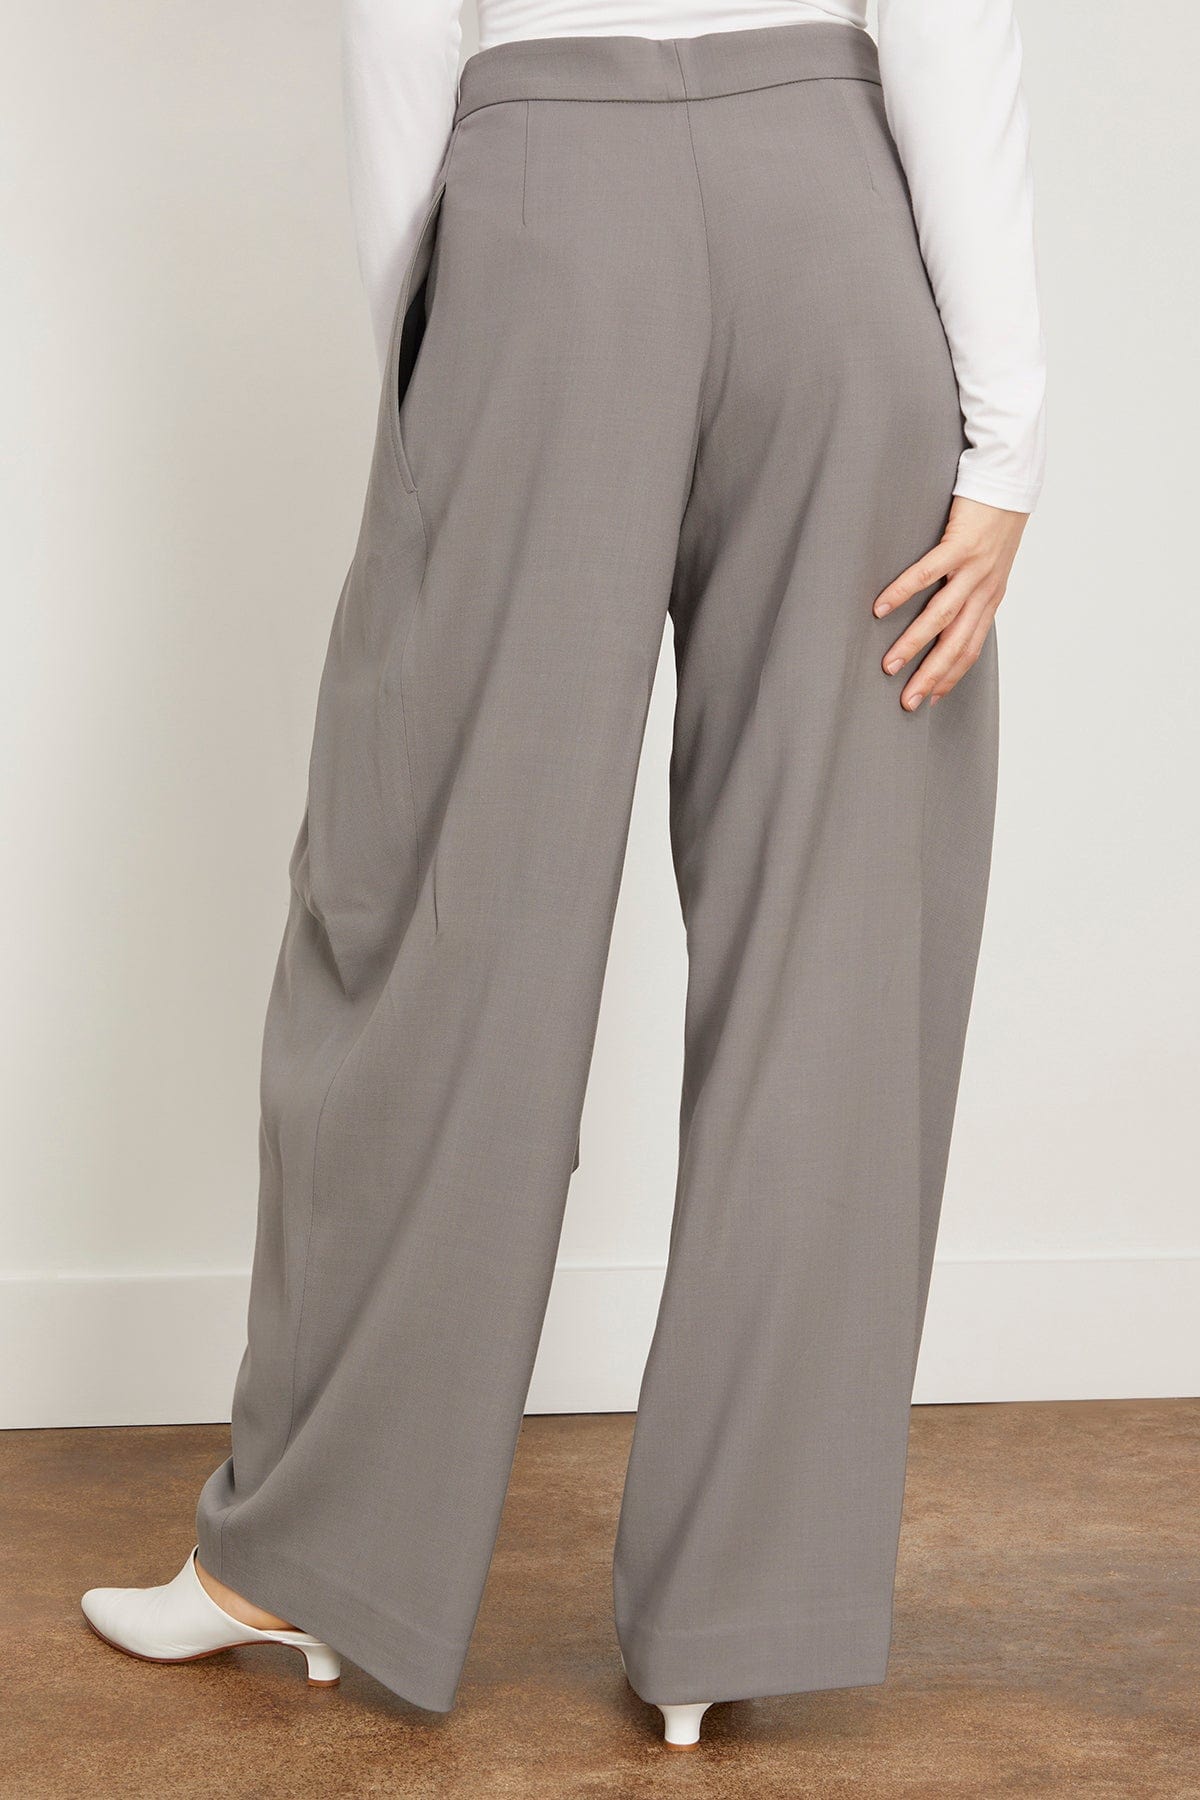 Ami Paris Pants Wide Fit Trousers with Floating Panels in Mineral Grey